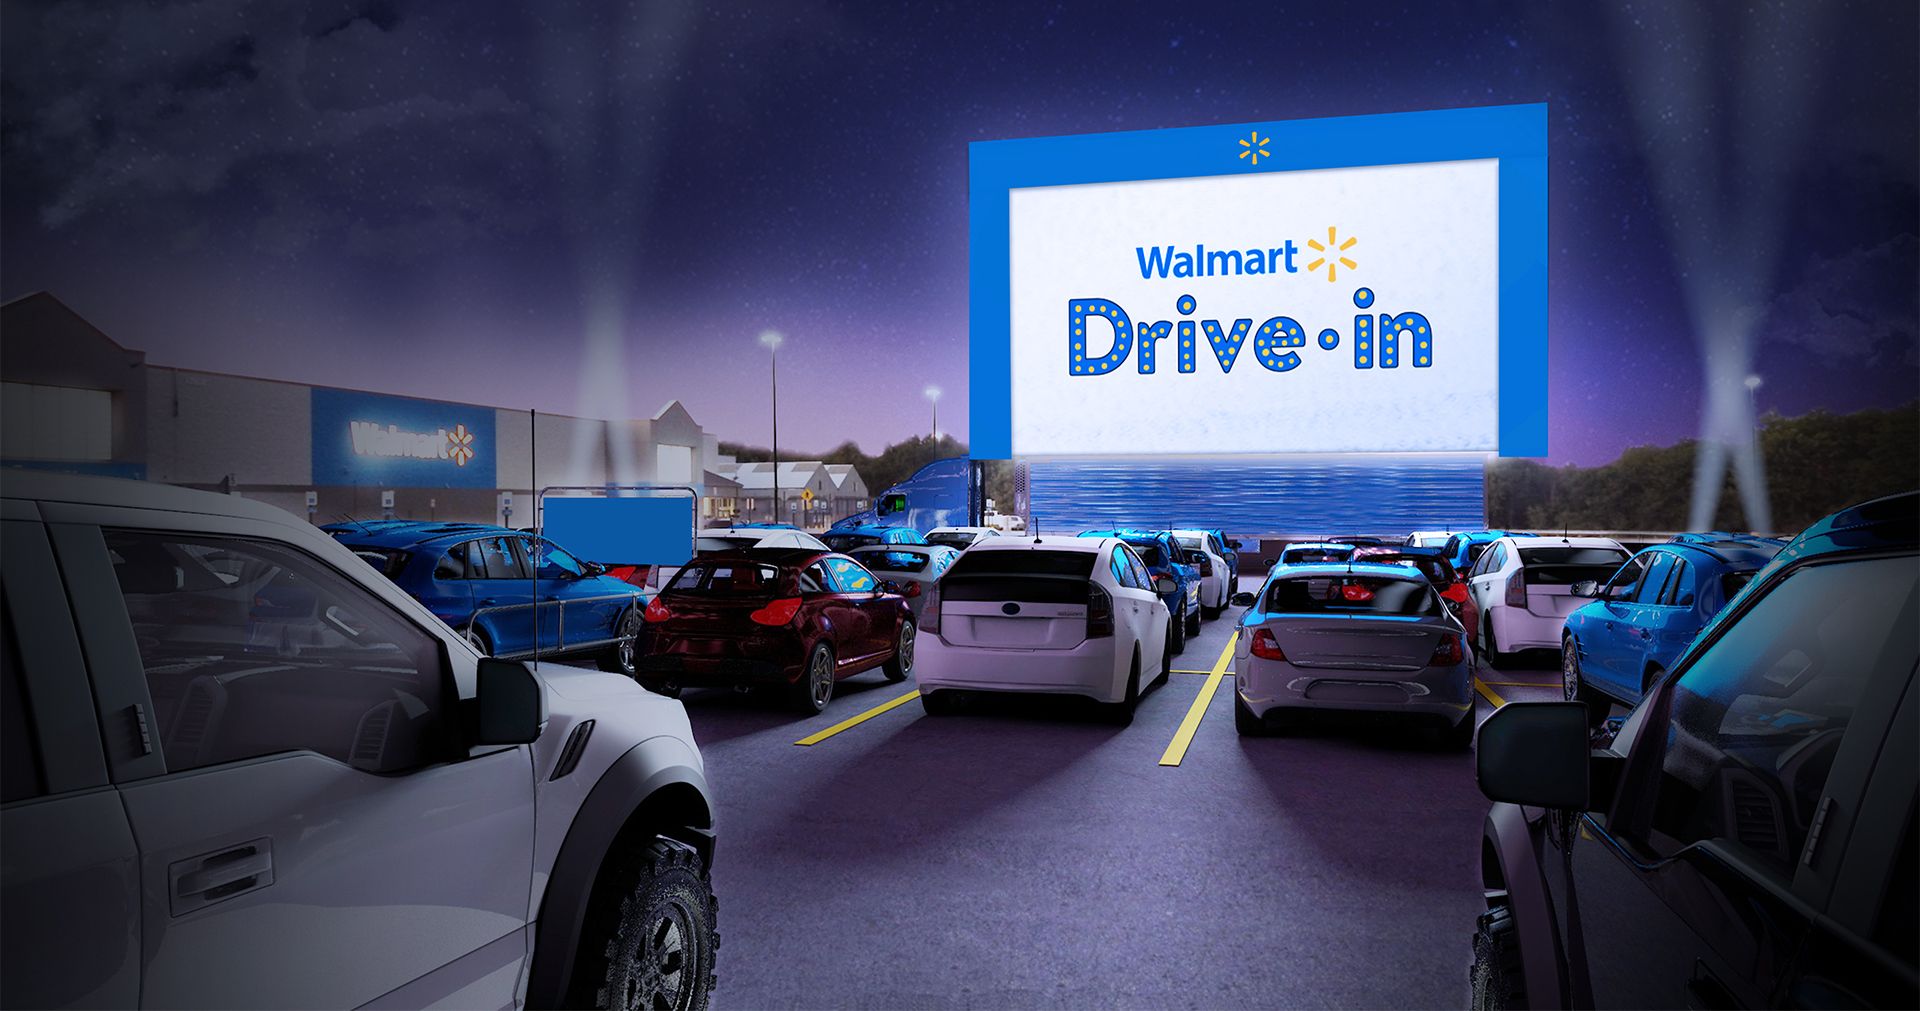 Walmart Is Turning Some of Its Parking Lots Into Drive-In Movie Theaters